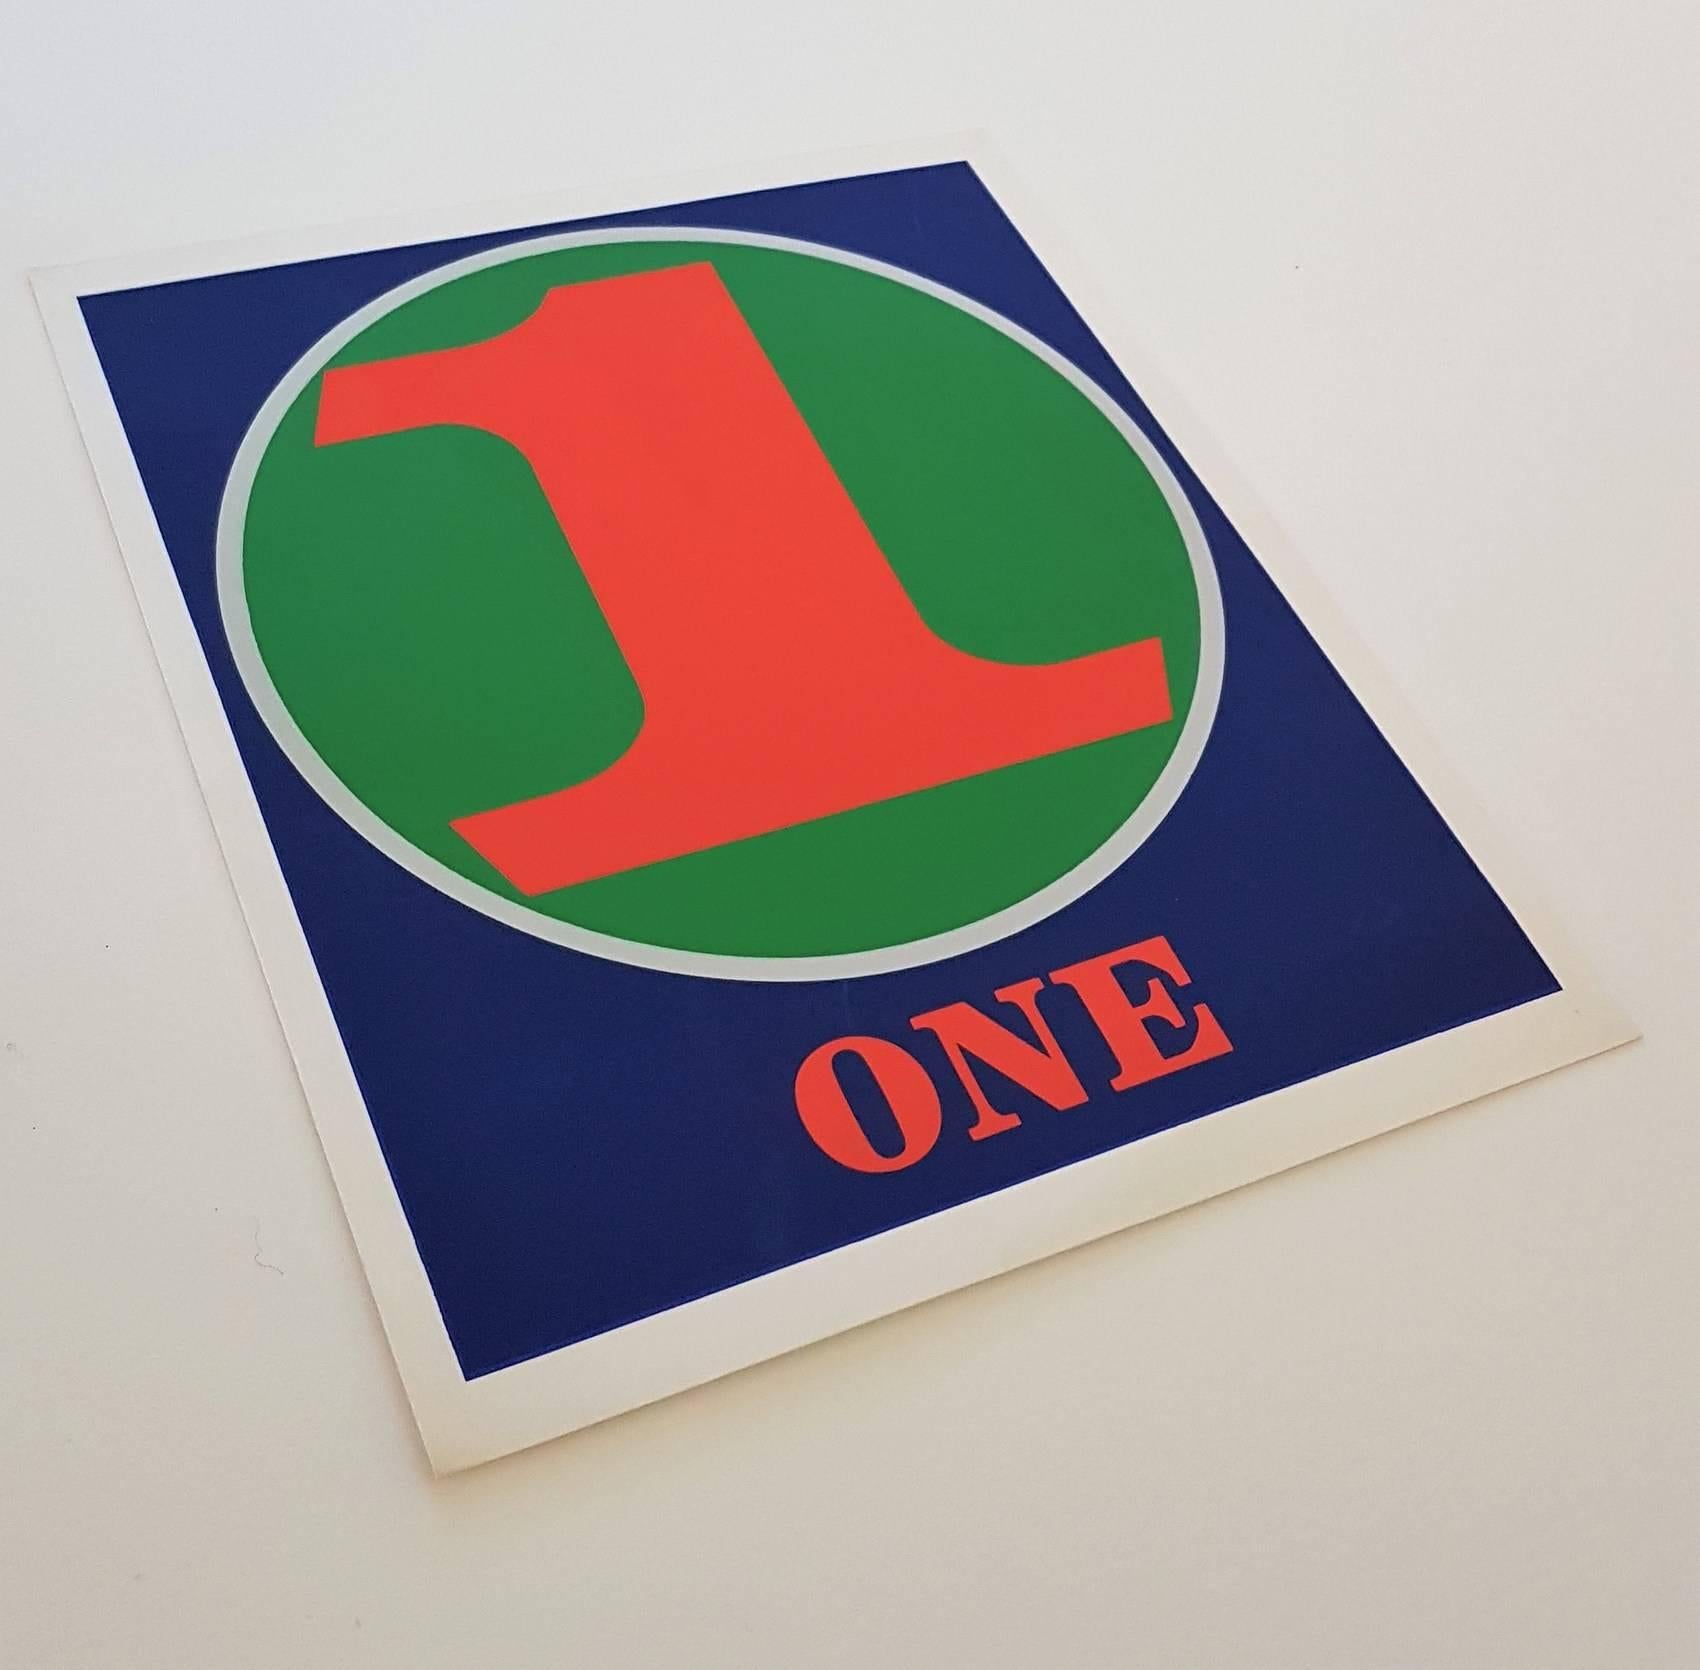 Number Suite - One - Modern Print by Robert Indiana